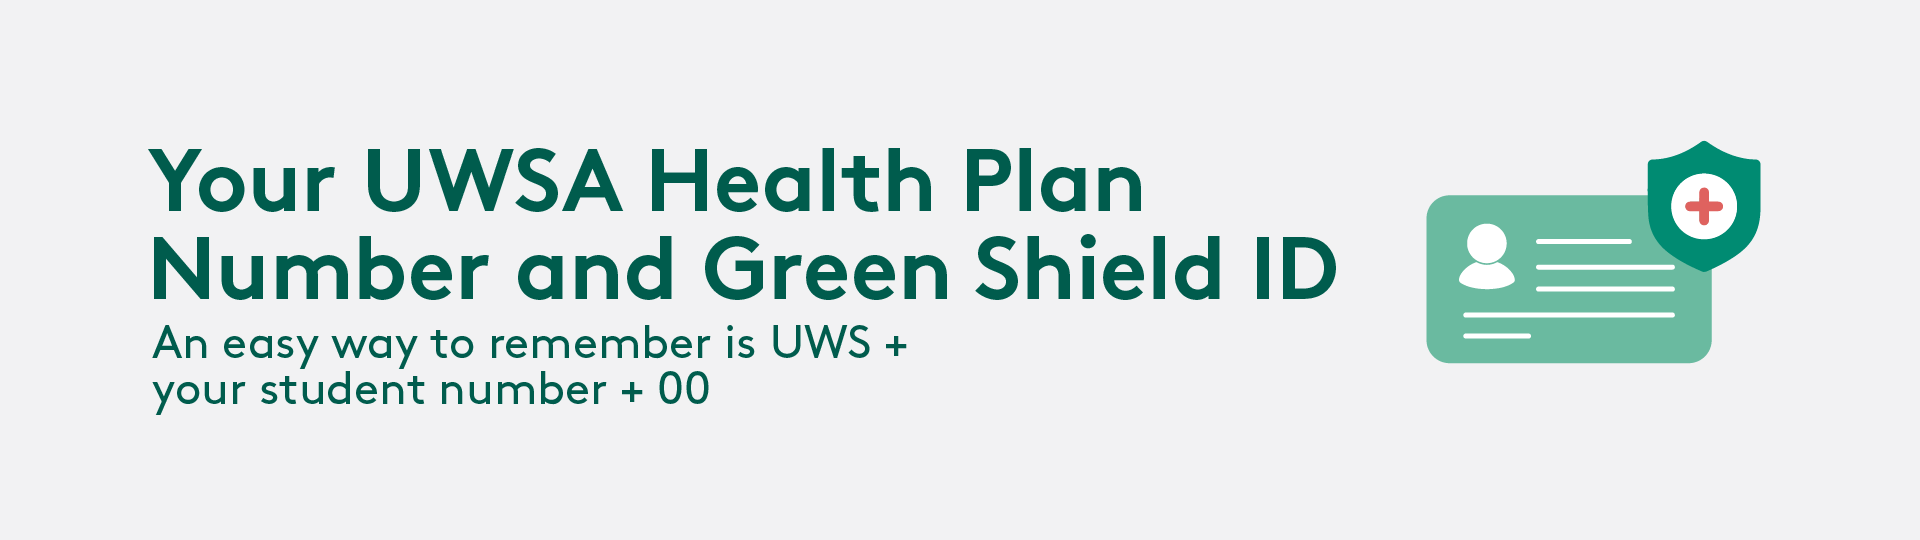 Your UWSA Health Plan Number and Green Shield ID. An easy way to remember is UWSA+your student number + 00